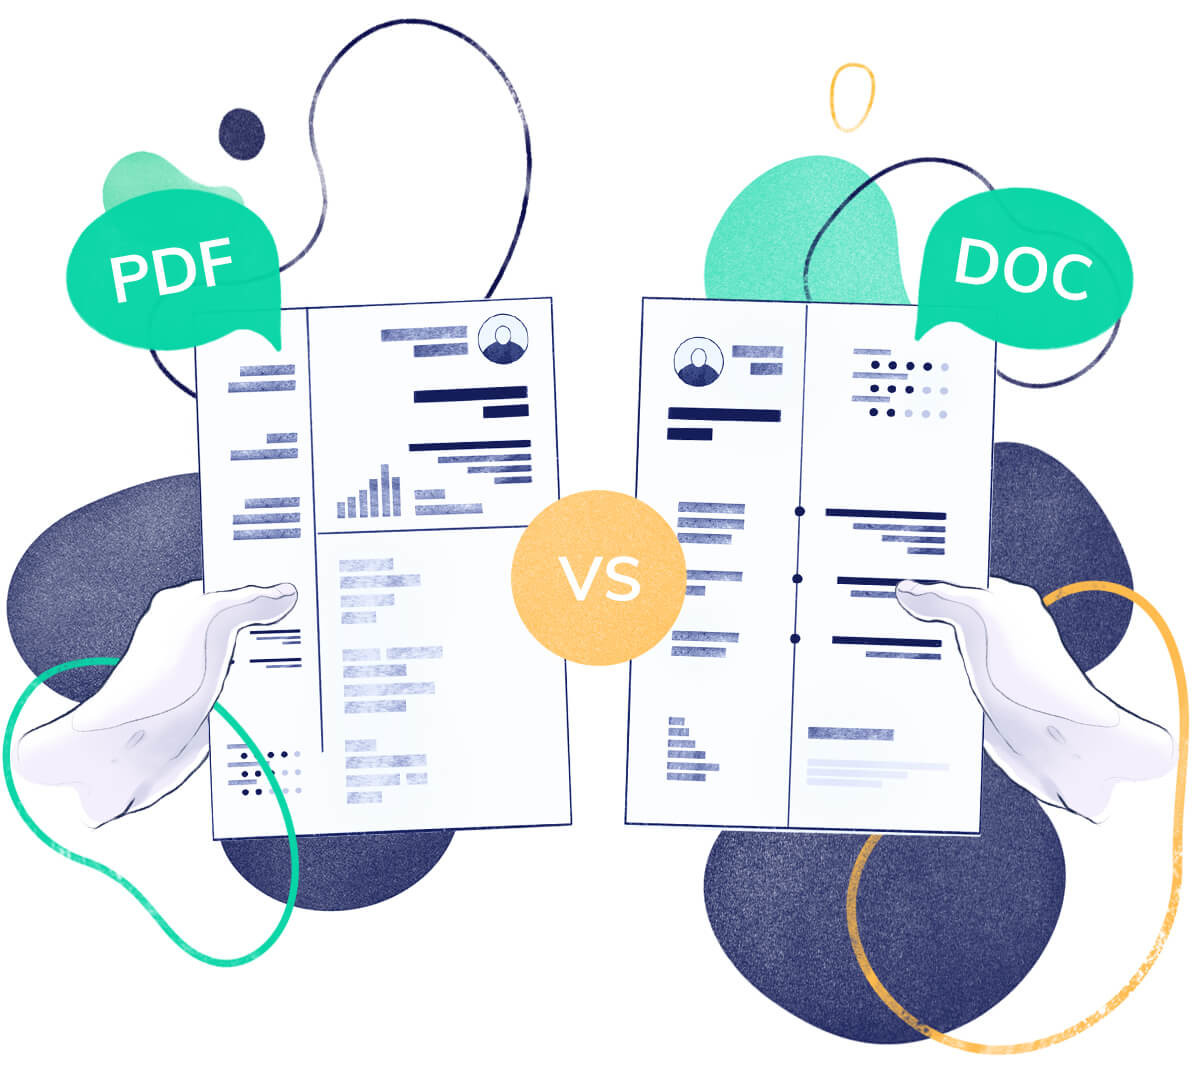 Resume: PDF or DOC? The Best Resume File Type in 2023